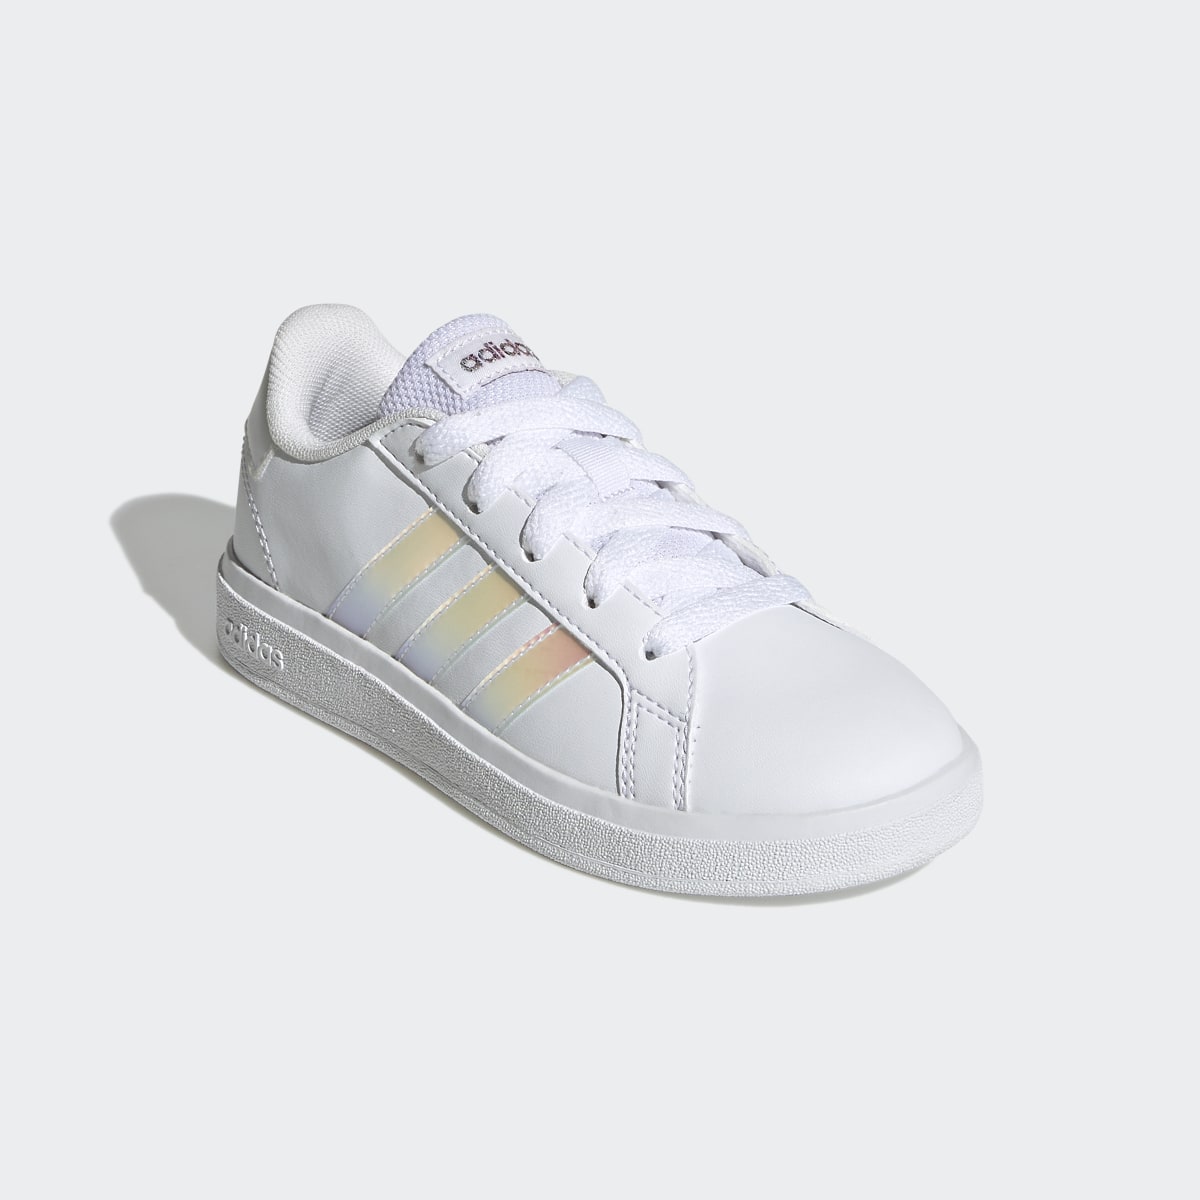 Adidas Grand Court Lifestyle Lace Tennis Shoes. 5